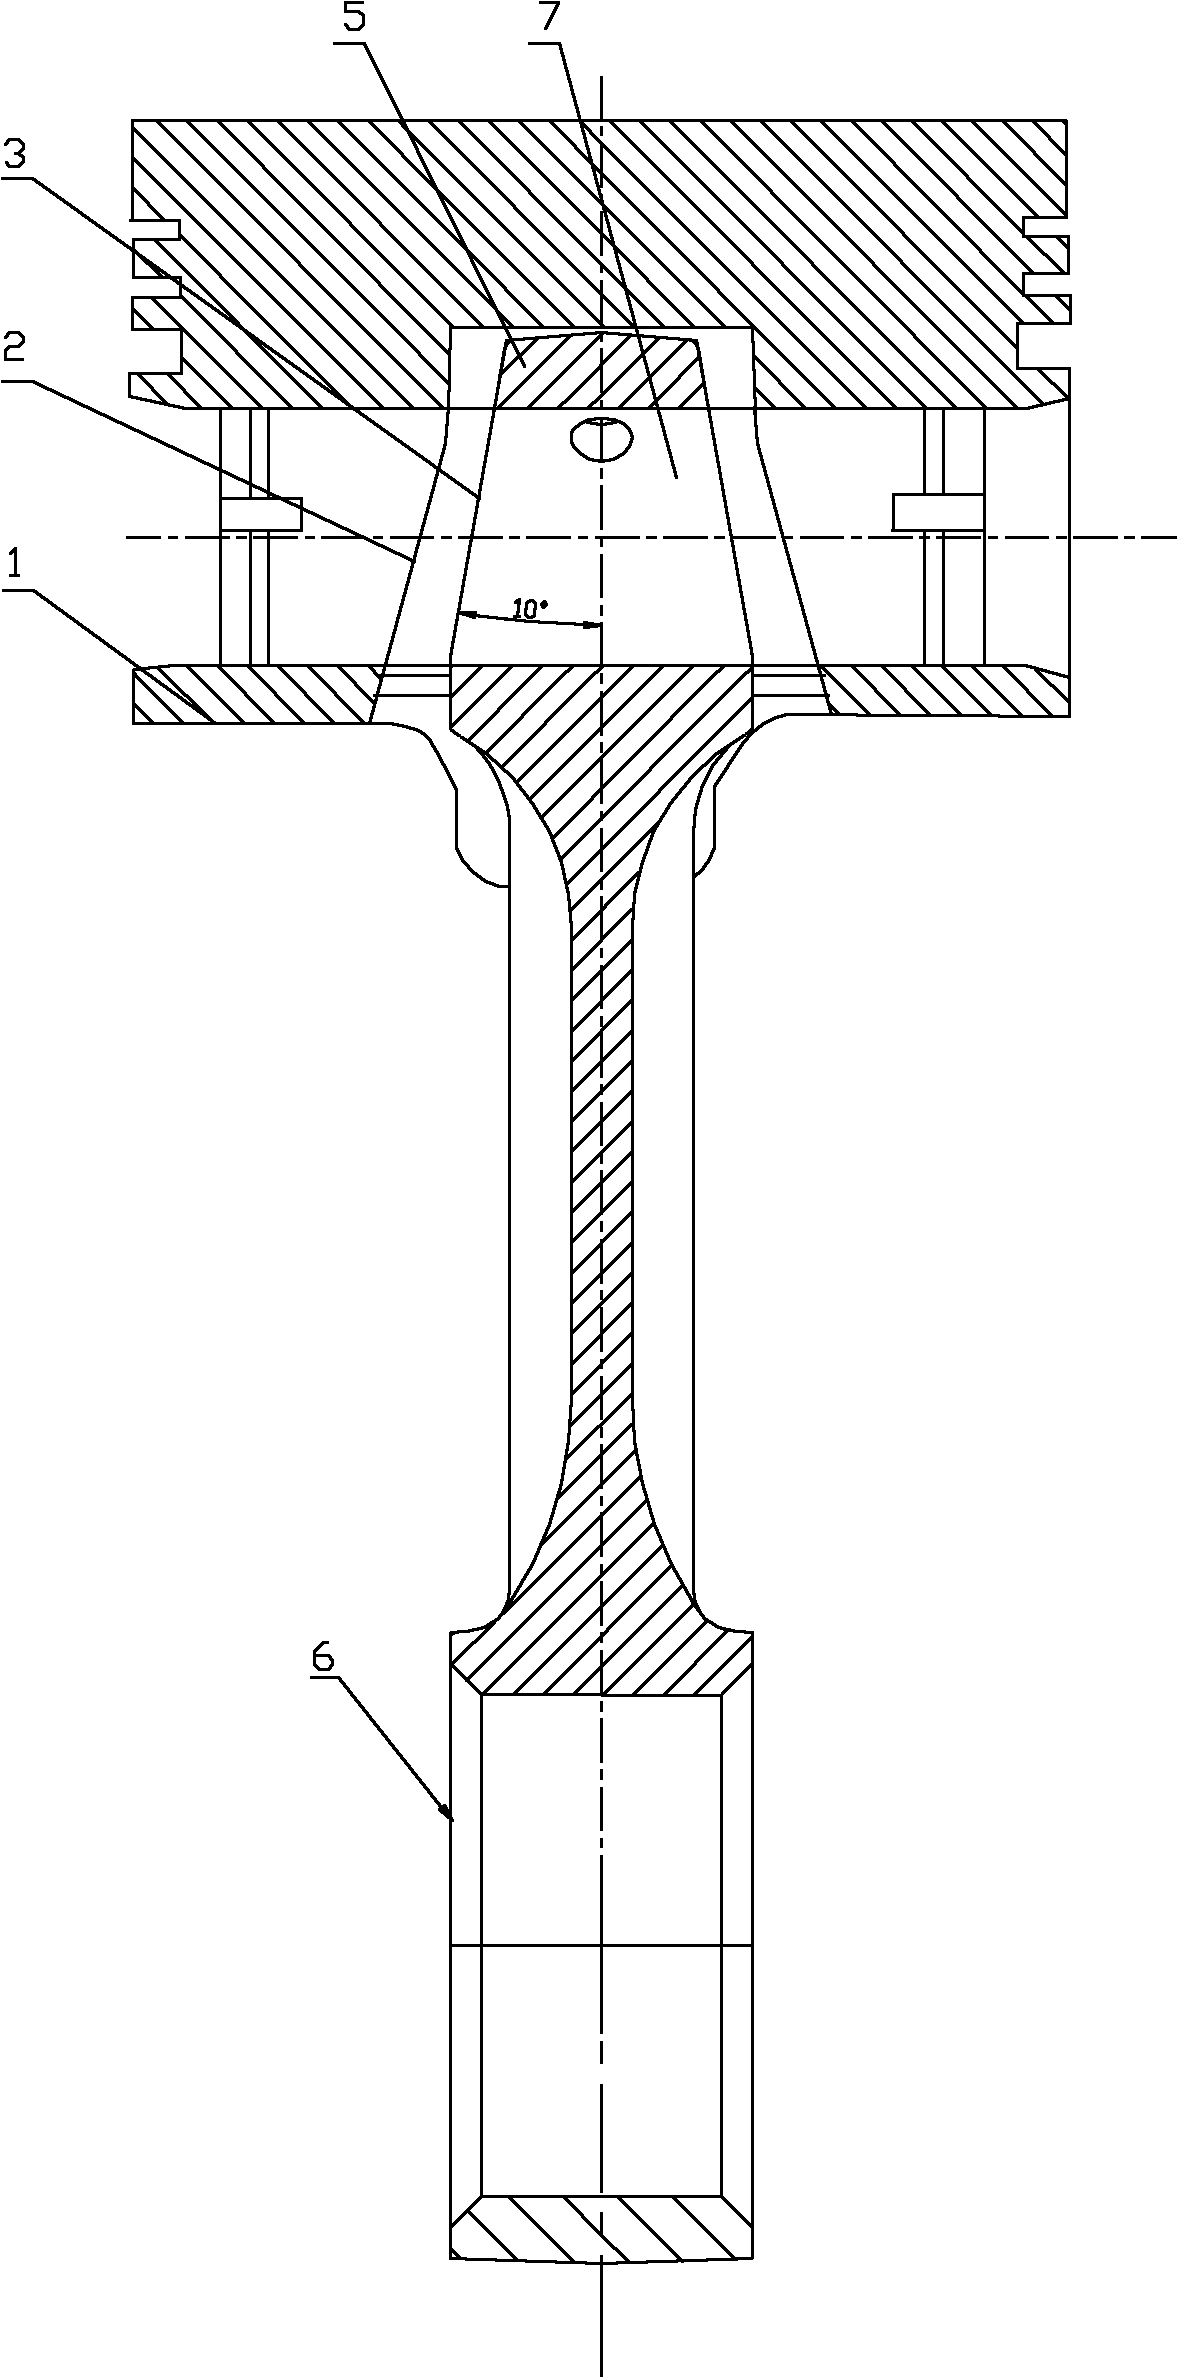 Piston connecting rod structure of internal-combustion engine